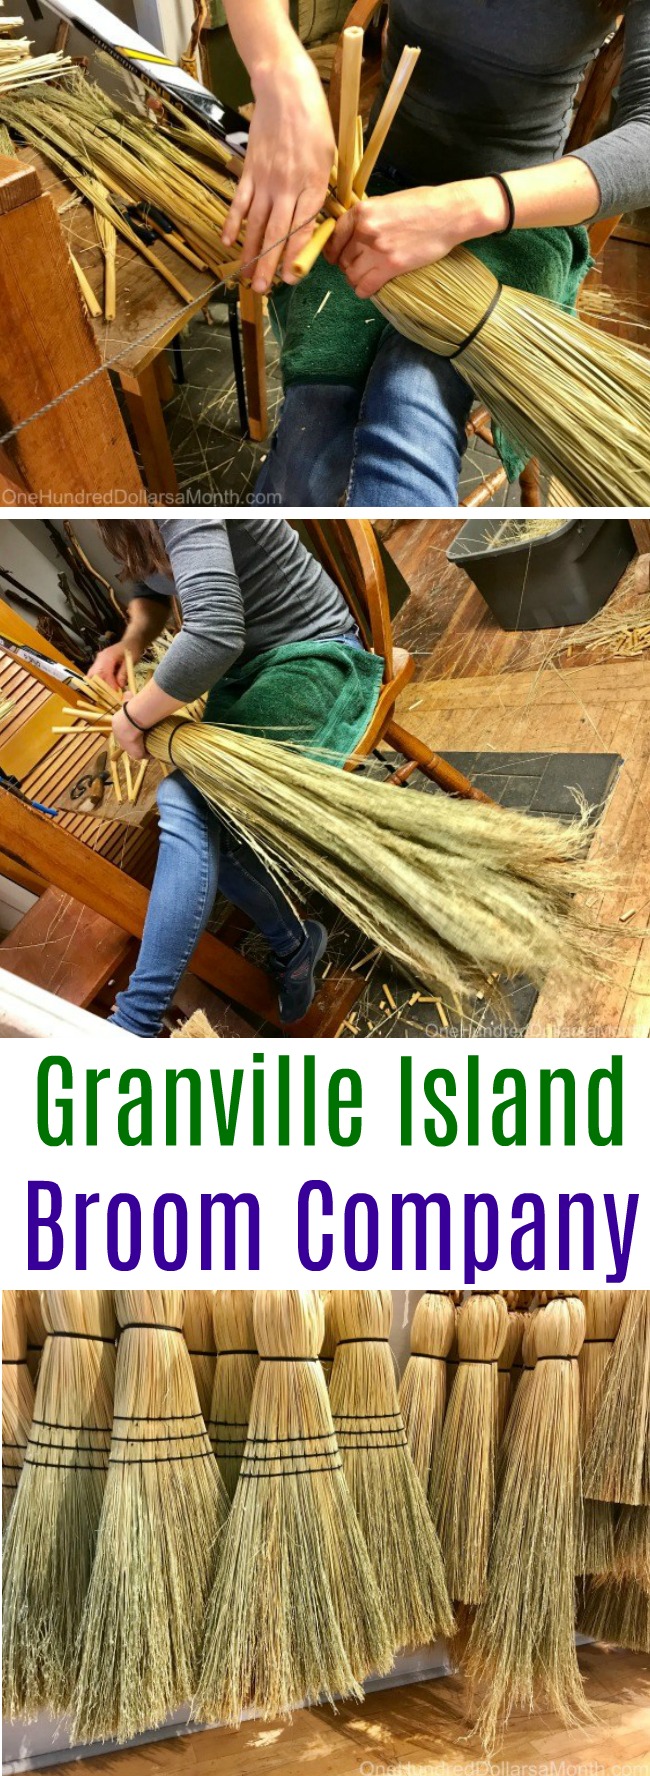 Granville Island Broom Company – Possibly the Coolest Handmade Broom Ever